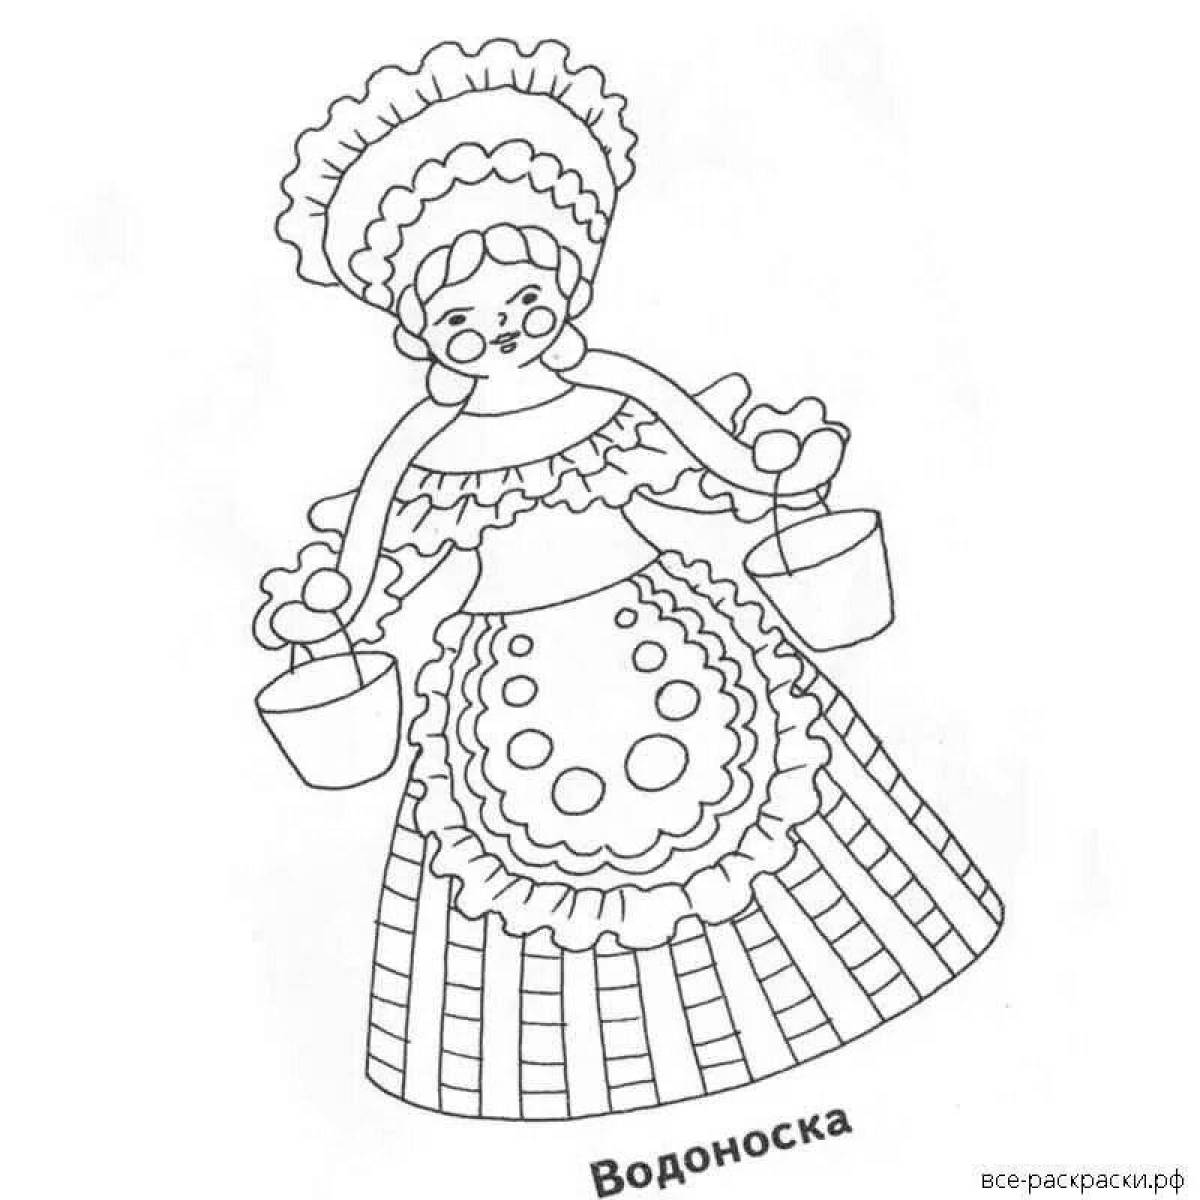 Colorful Dymkovo lady coloring book for children